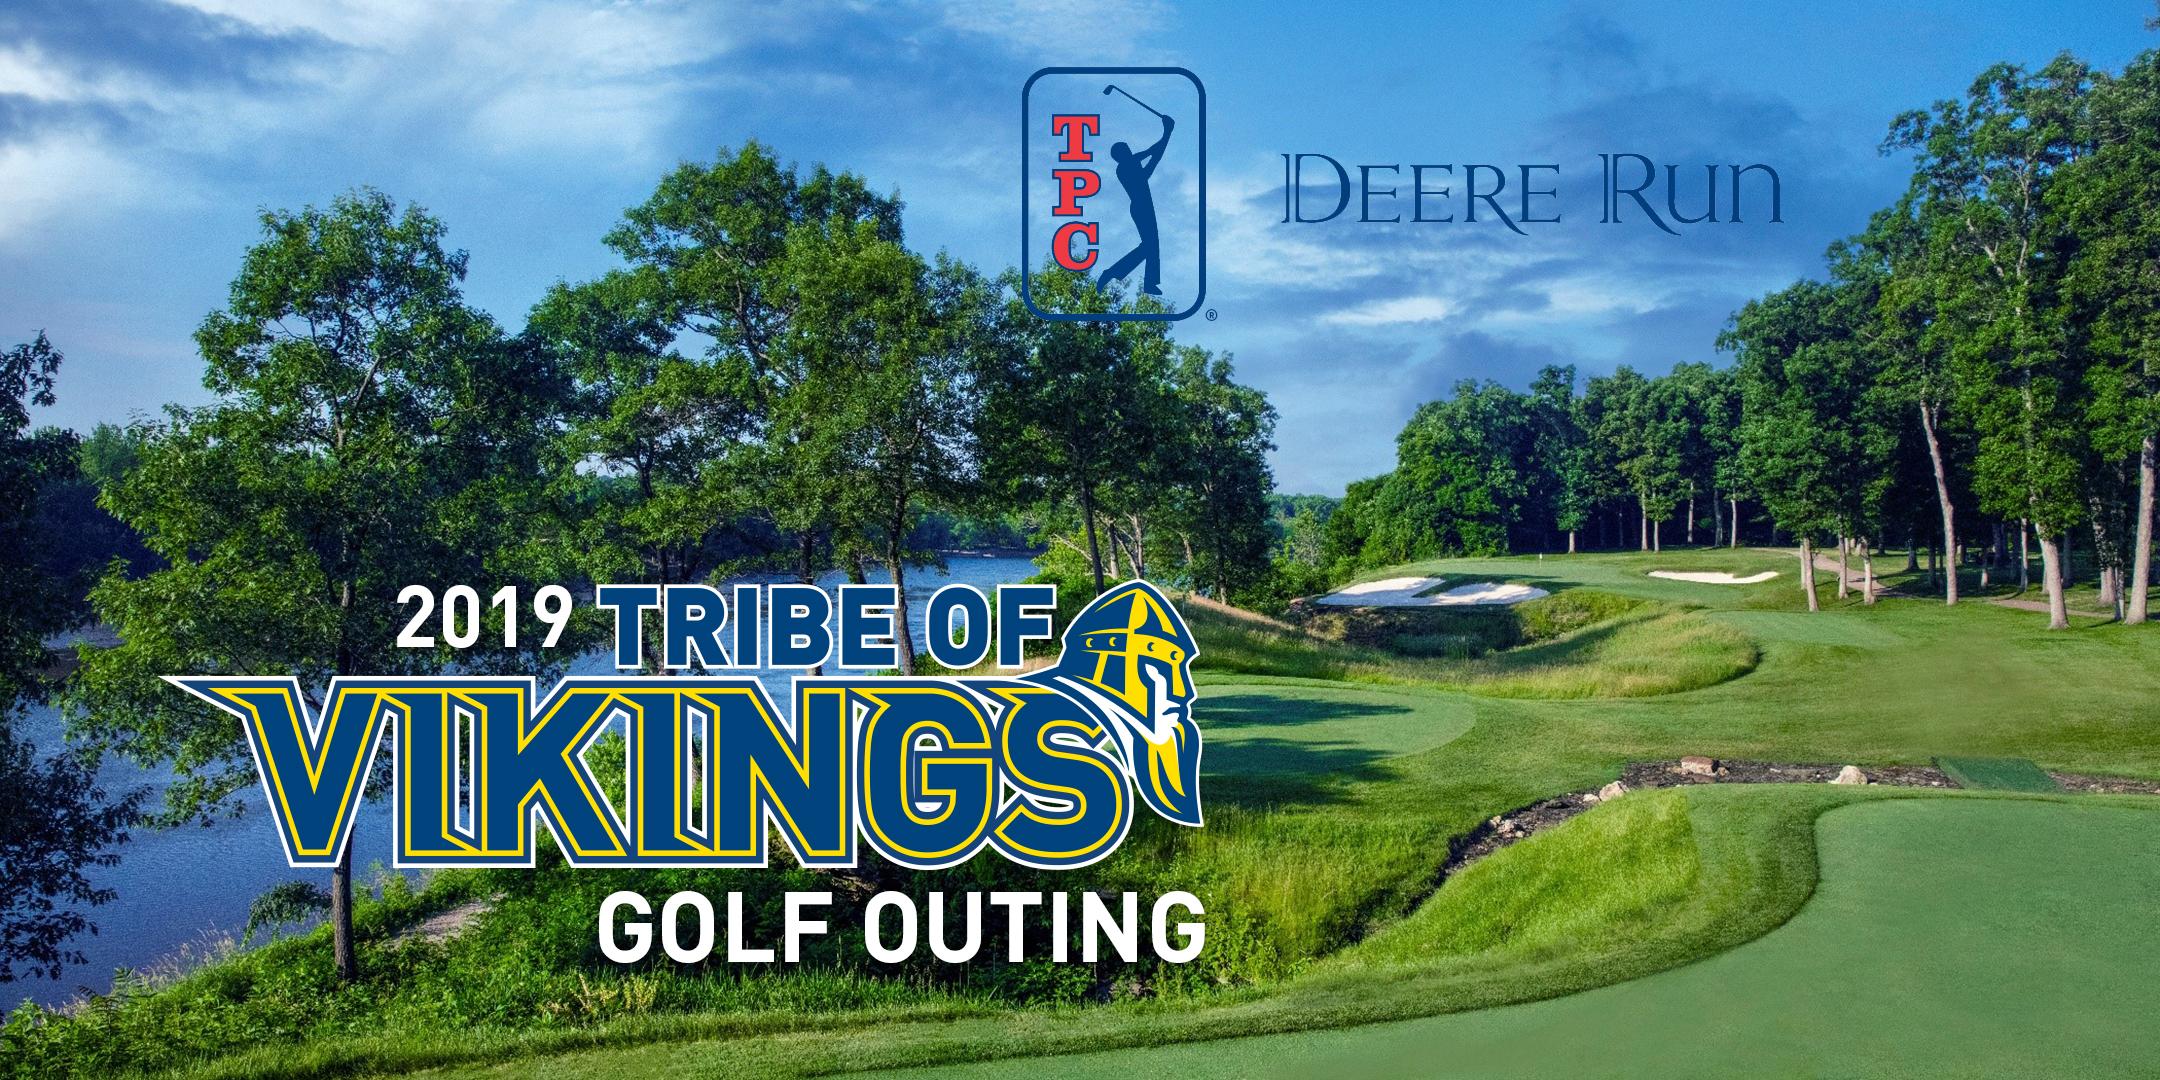 2019 Tribe of Vikings Golf Outing